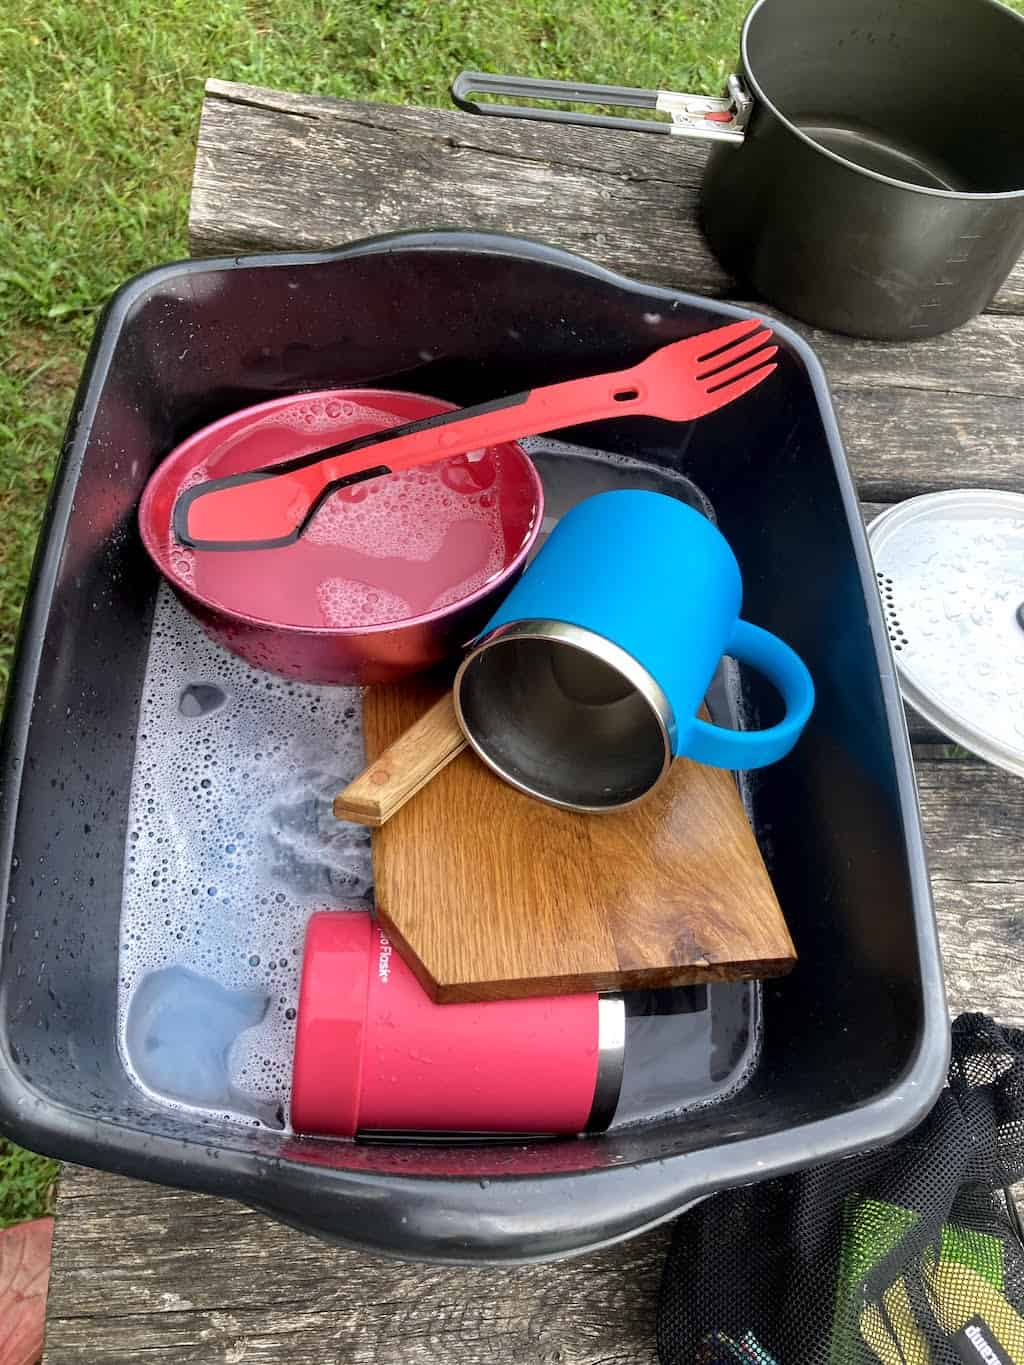 A plastic tub full of camping dishes for washing.